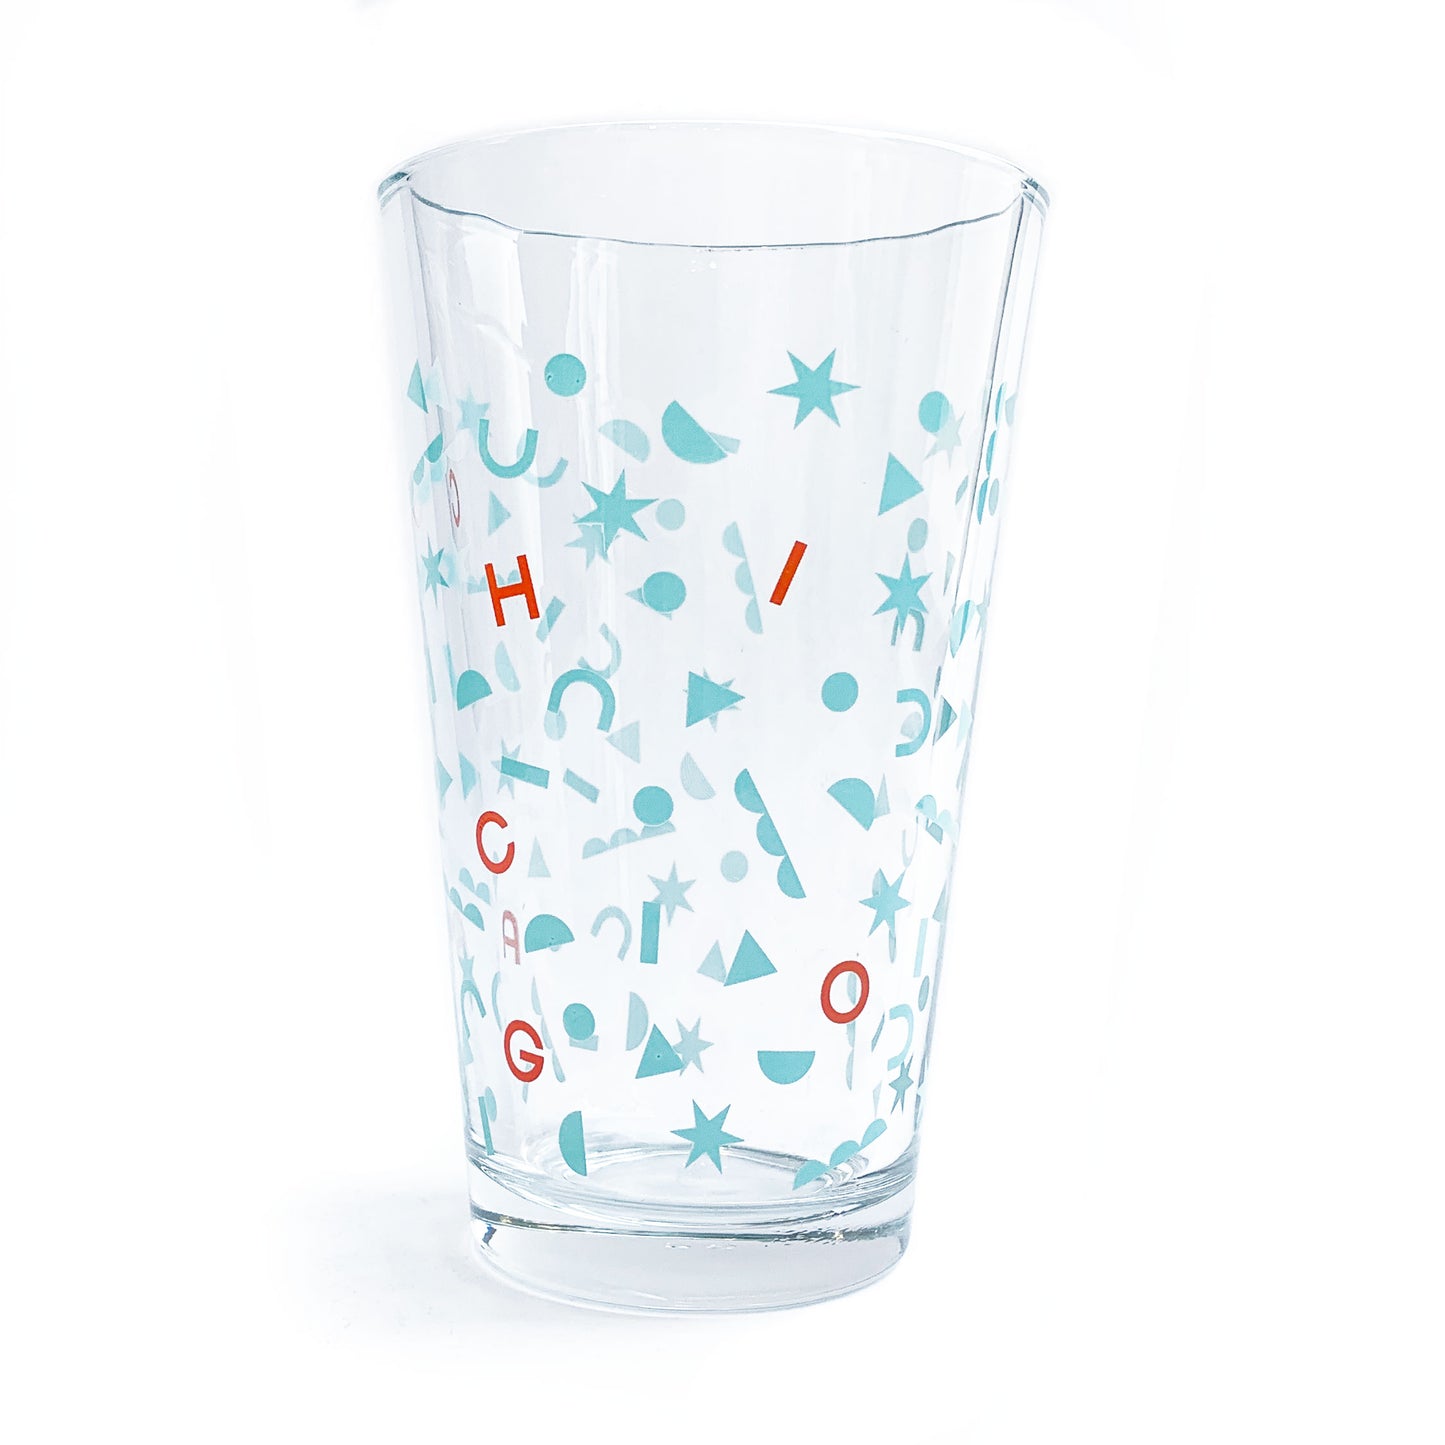 Chicago Shapes 16 oz Pint Glass